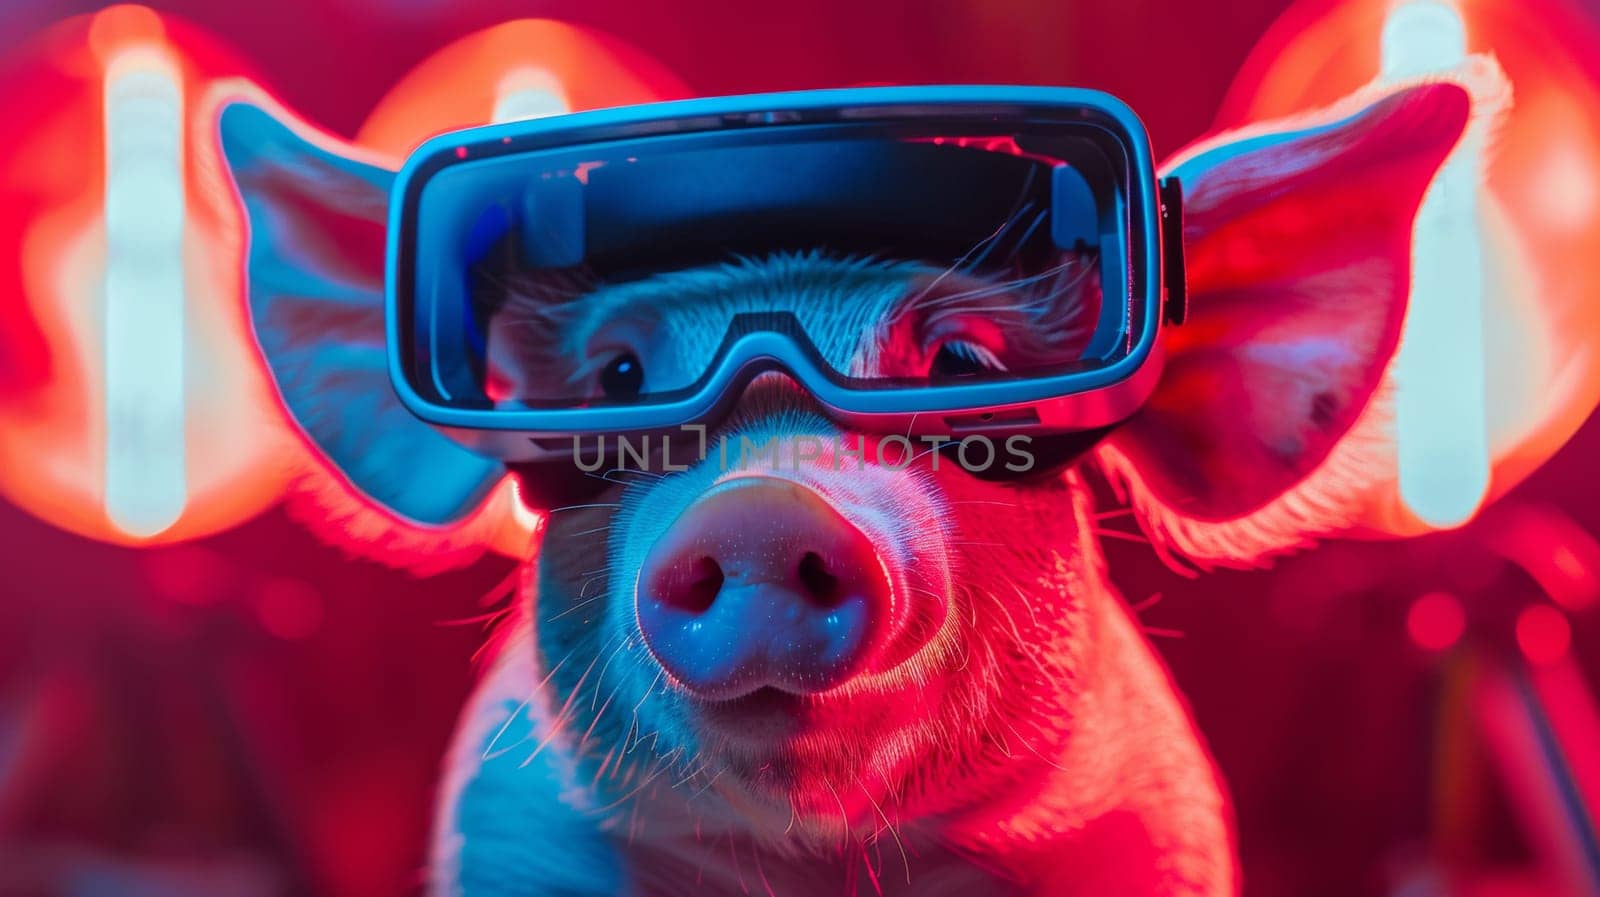 A pig wearing goggles and a red light behind it